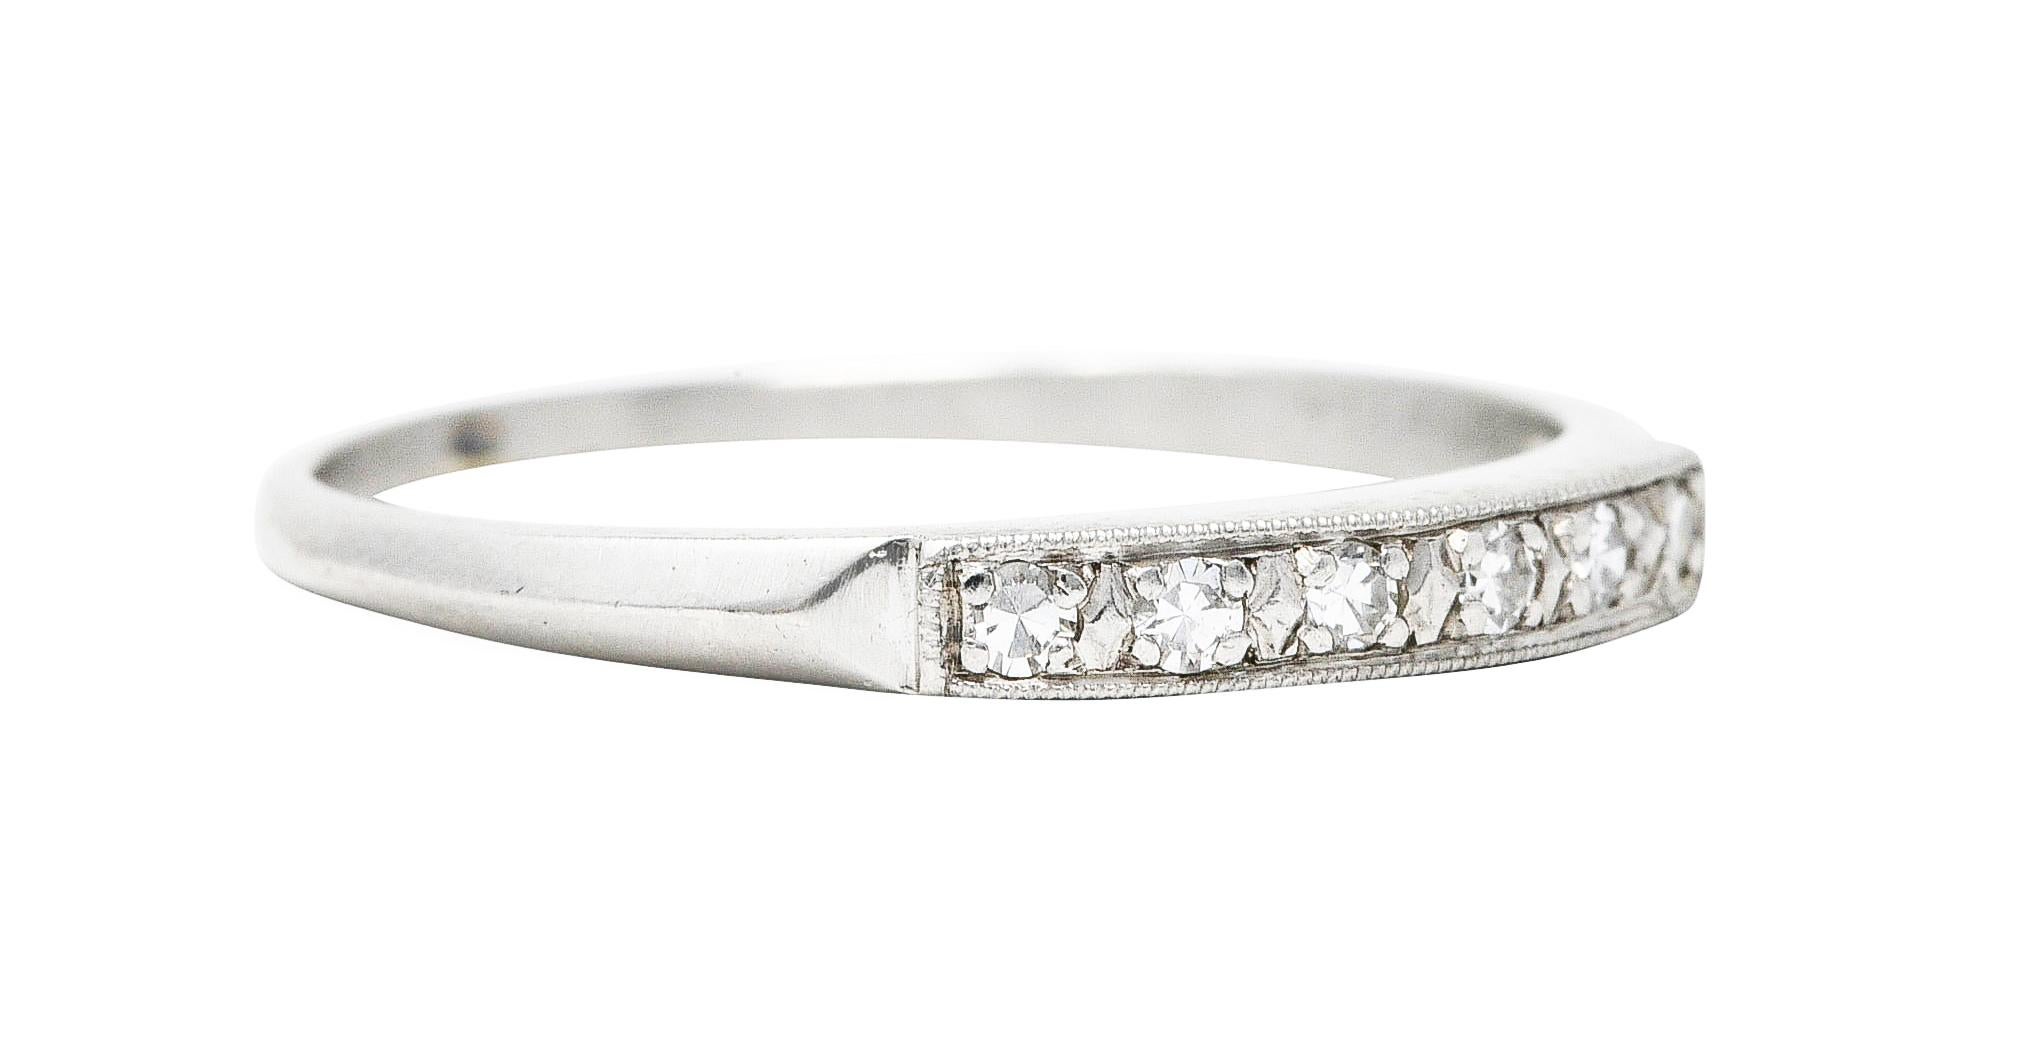 Band ring is set to front by six single cut diamonds

Weighing in total approximately 0.10 carat - eye clean and bright

With milgrain edges and subtle knife edge shoulders

Tested as platinum

Circa: 1930

Ring size: 8 1/4 and sizable

Measures